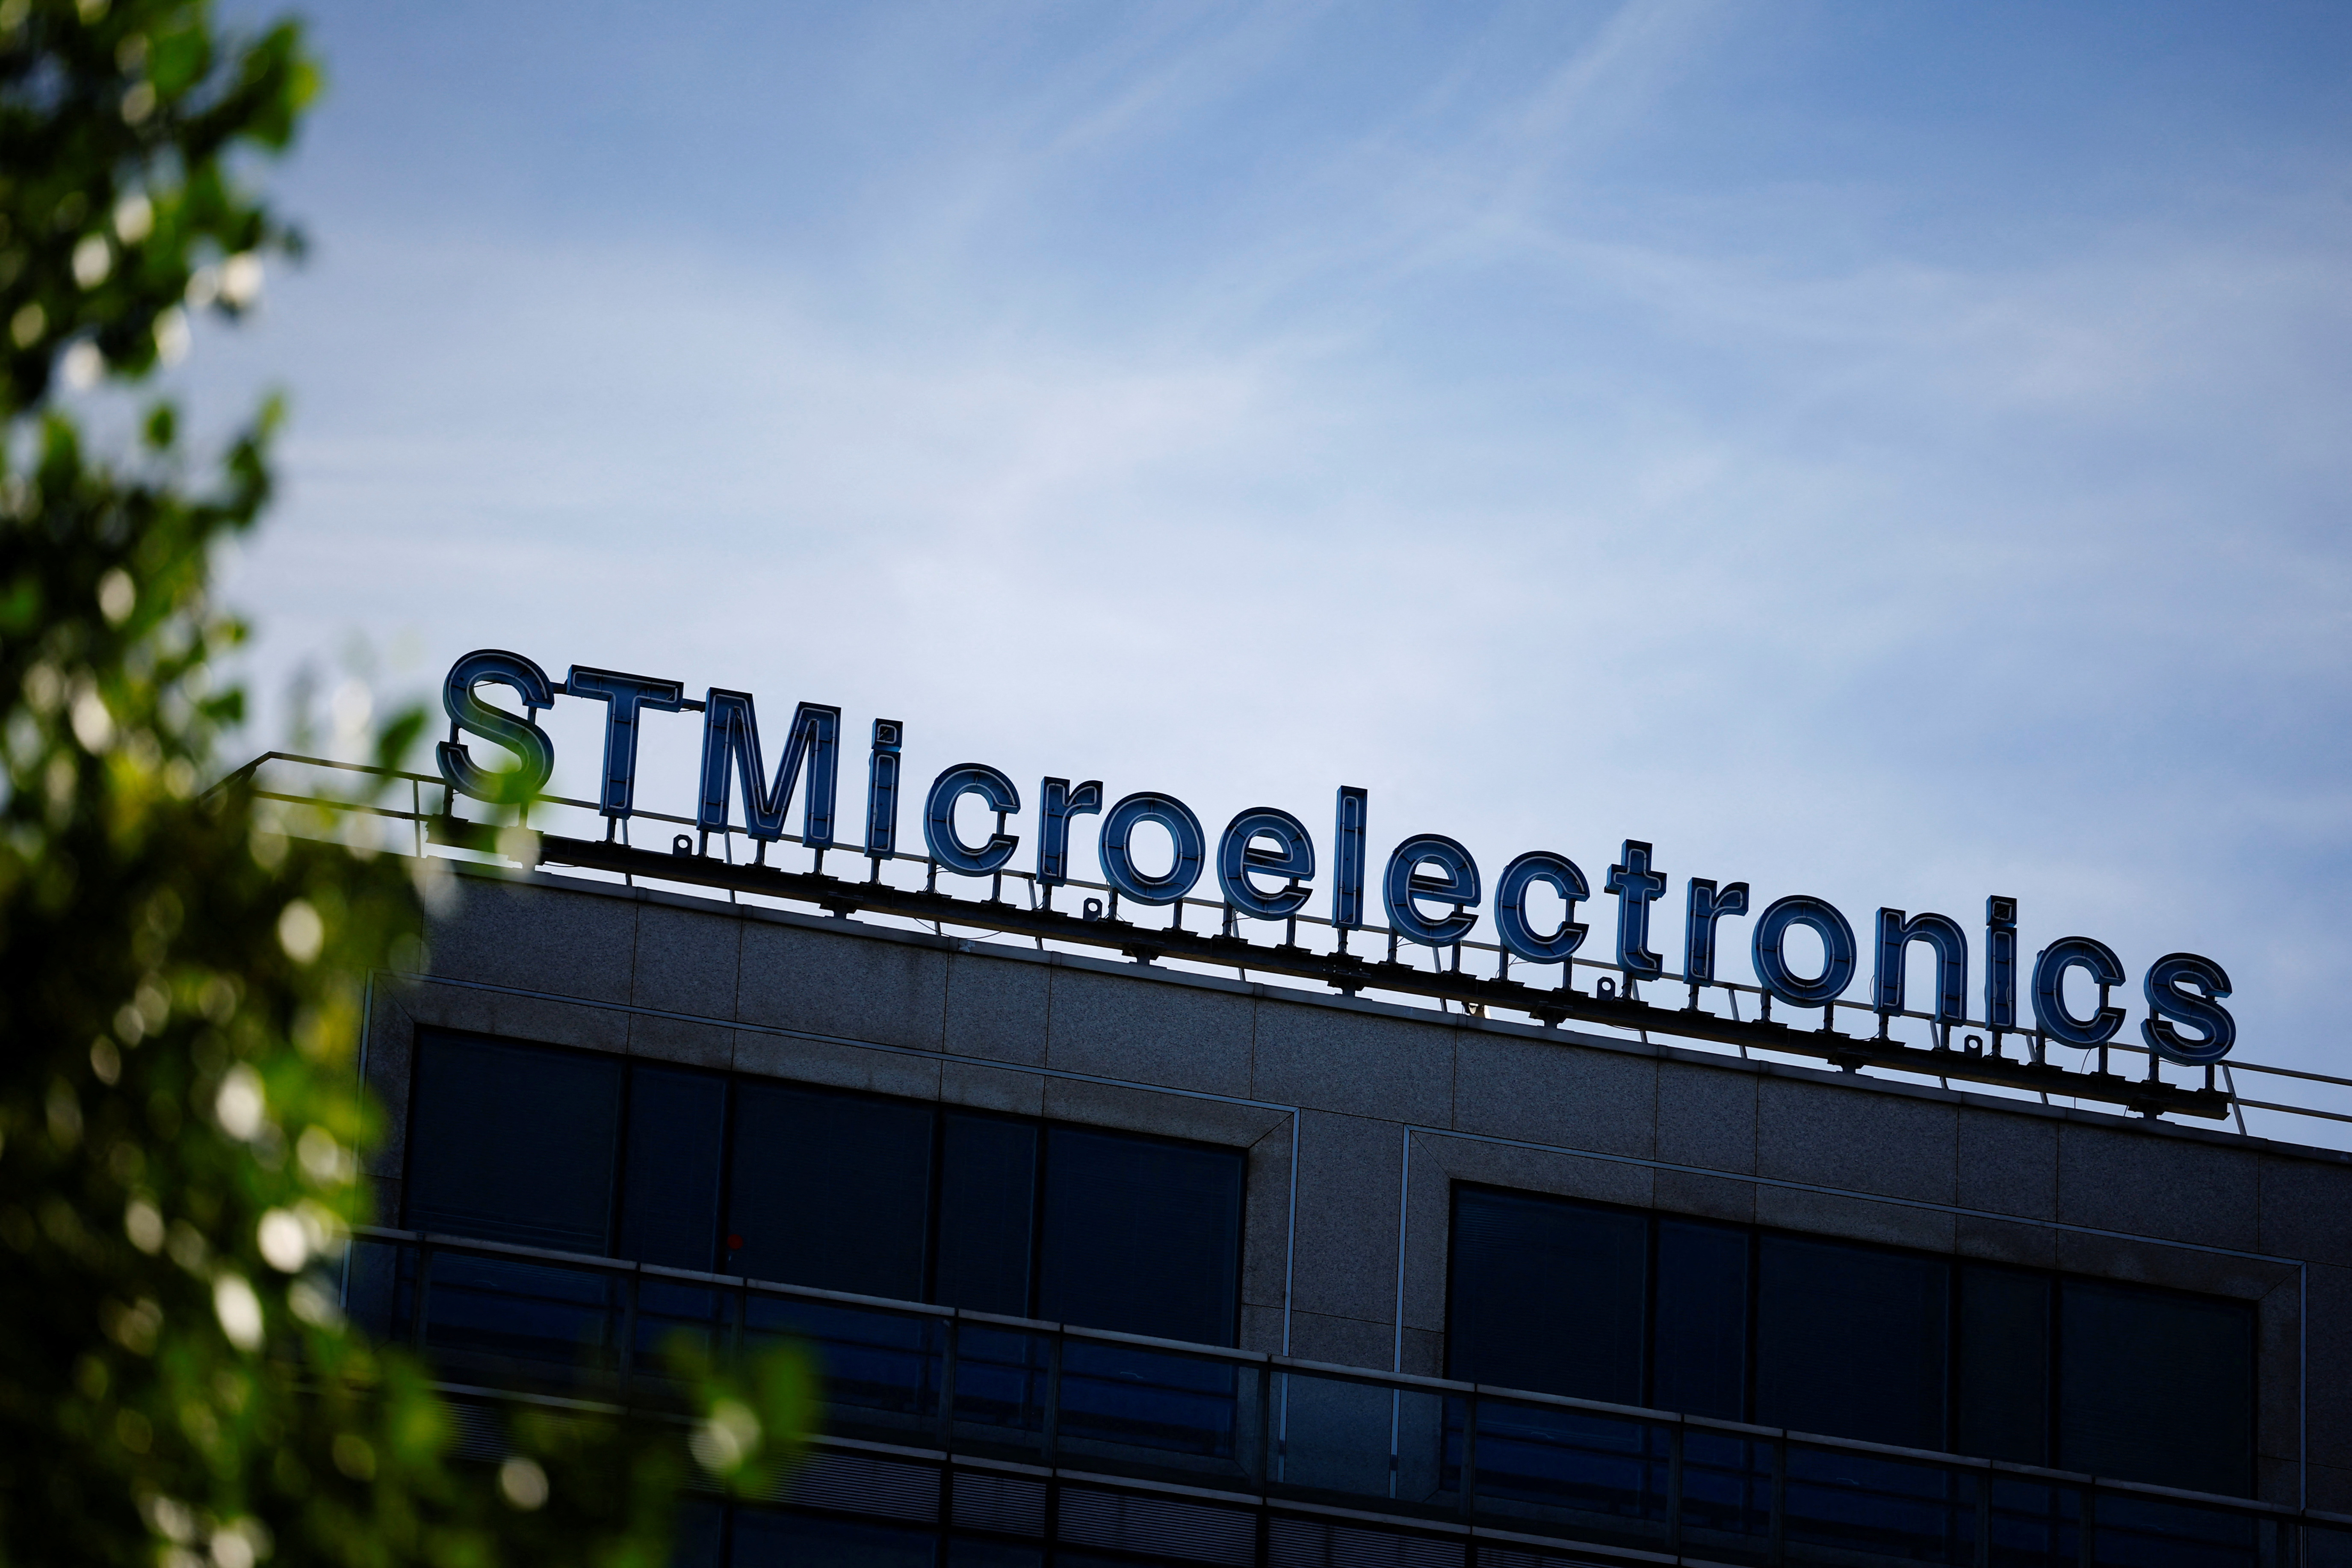 The logo of STMIcroelectronics is seen outside a company building in Montrouge